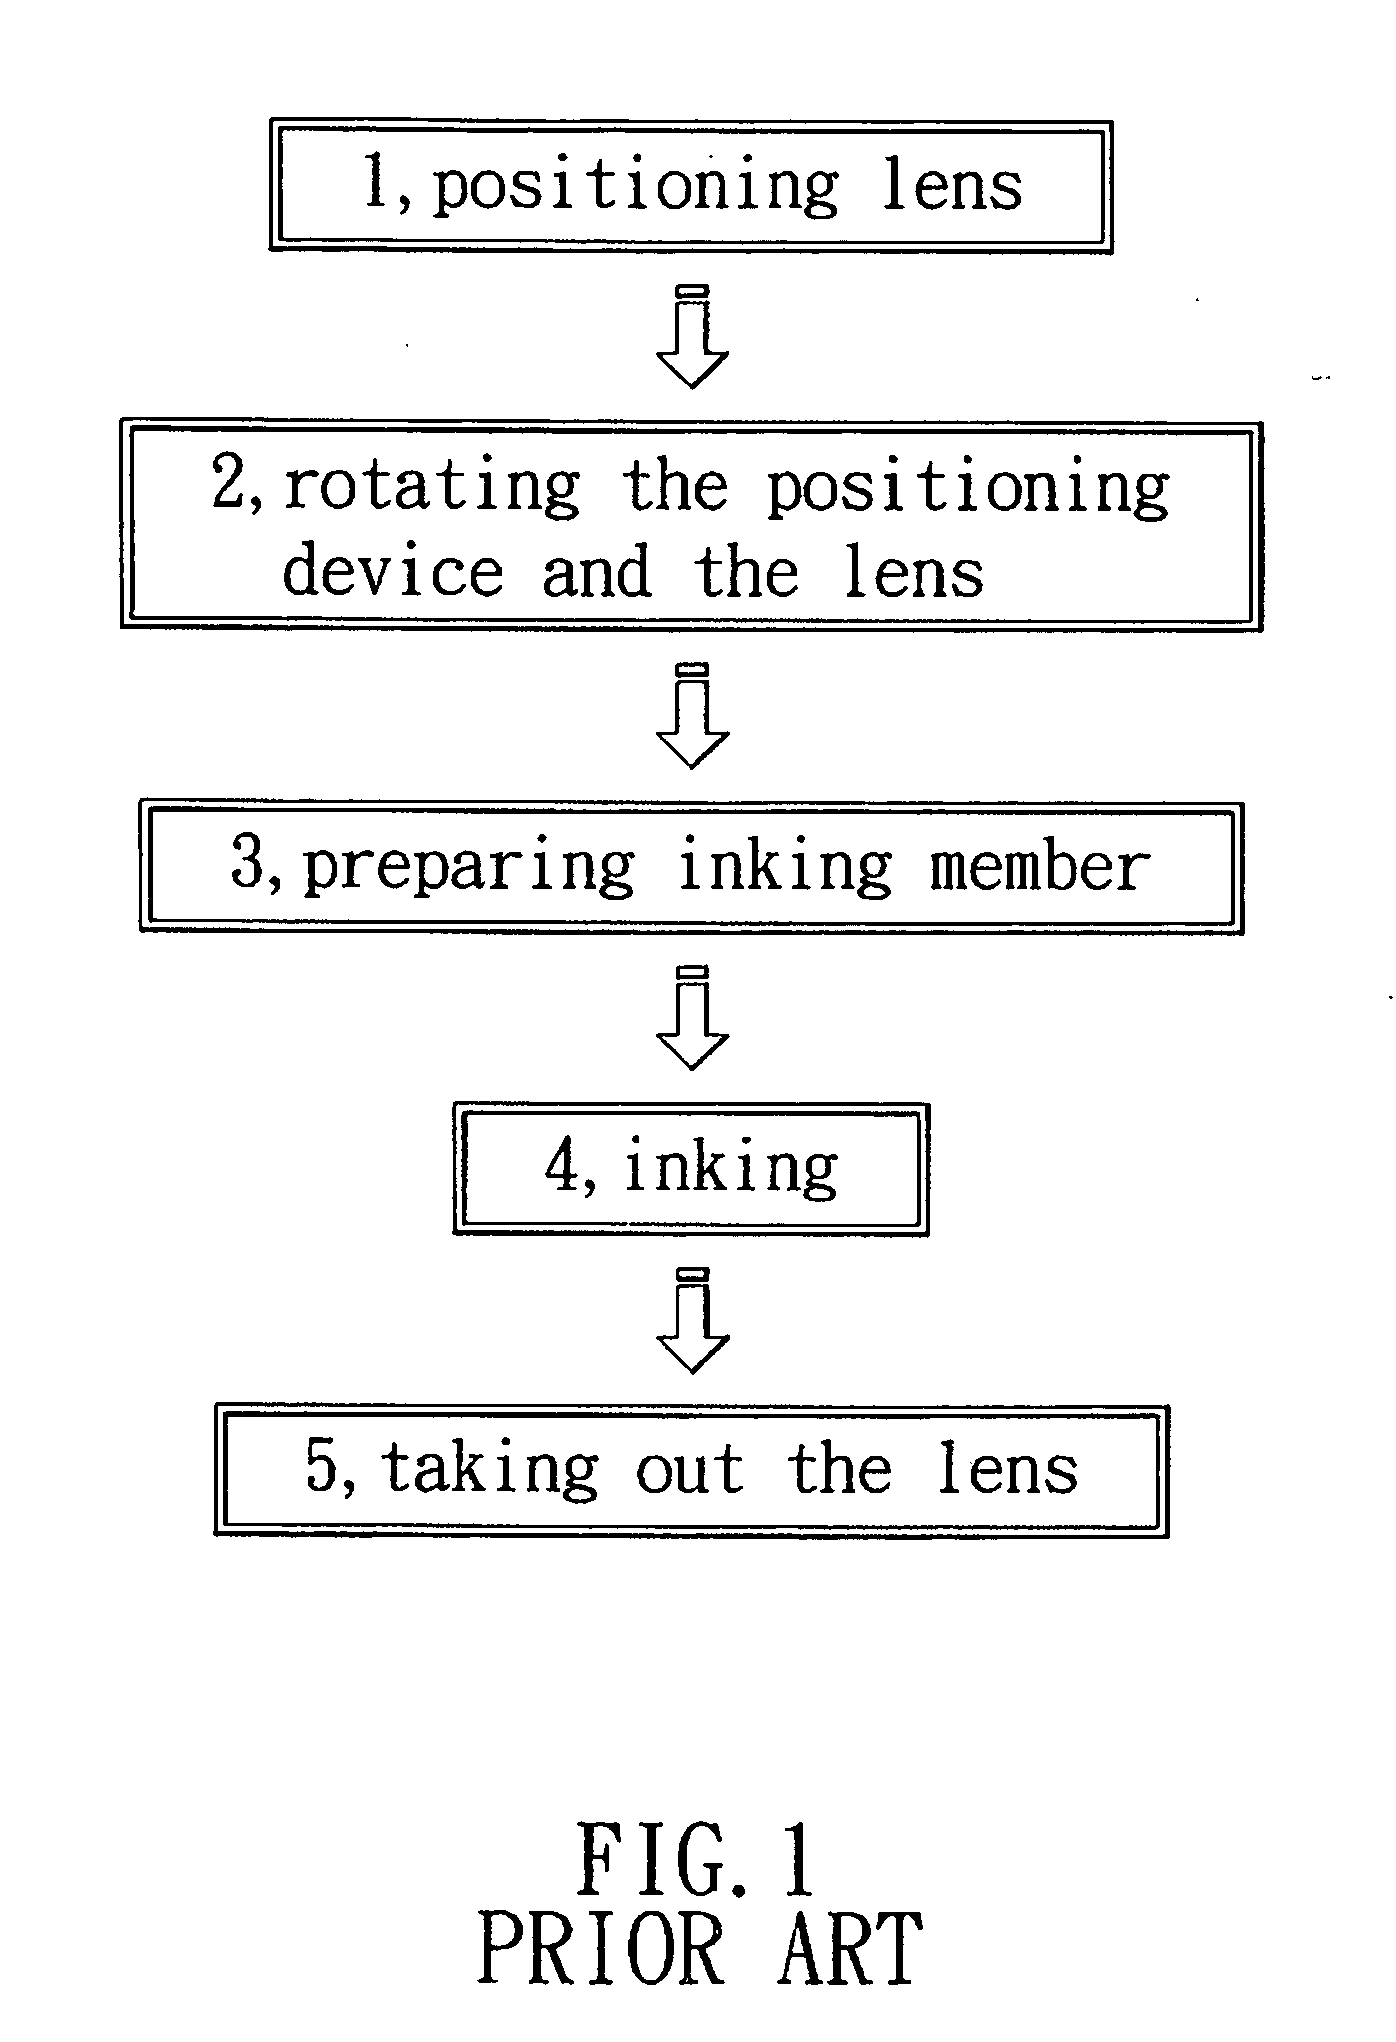 Method and apparatus for inking a lens